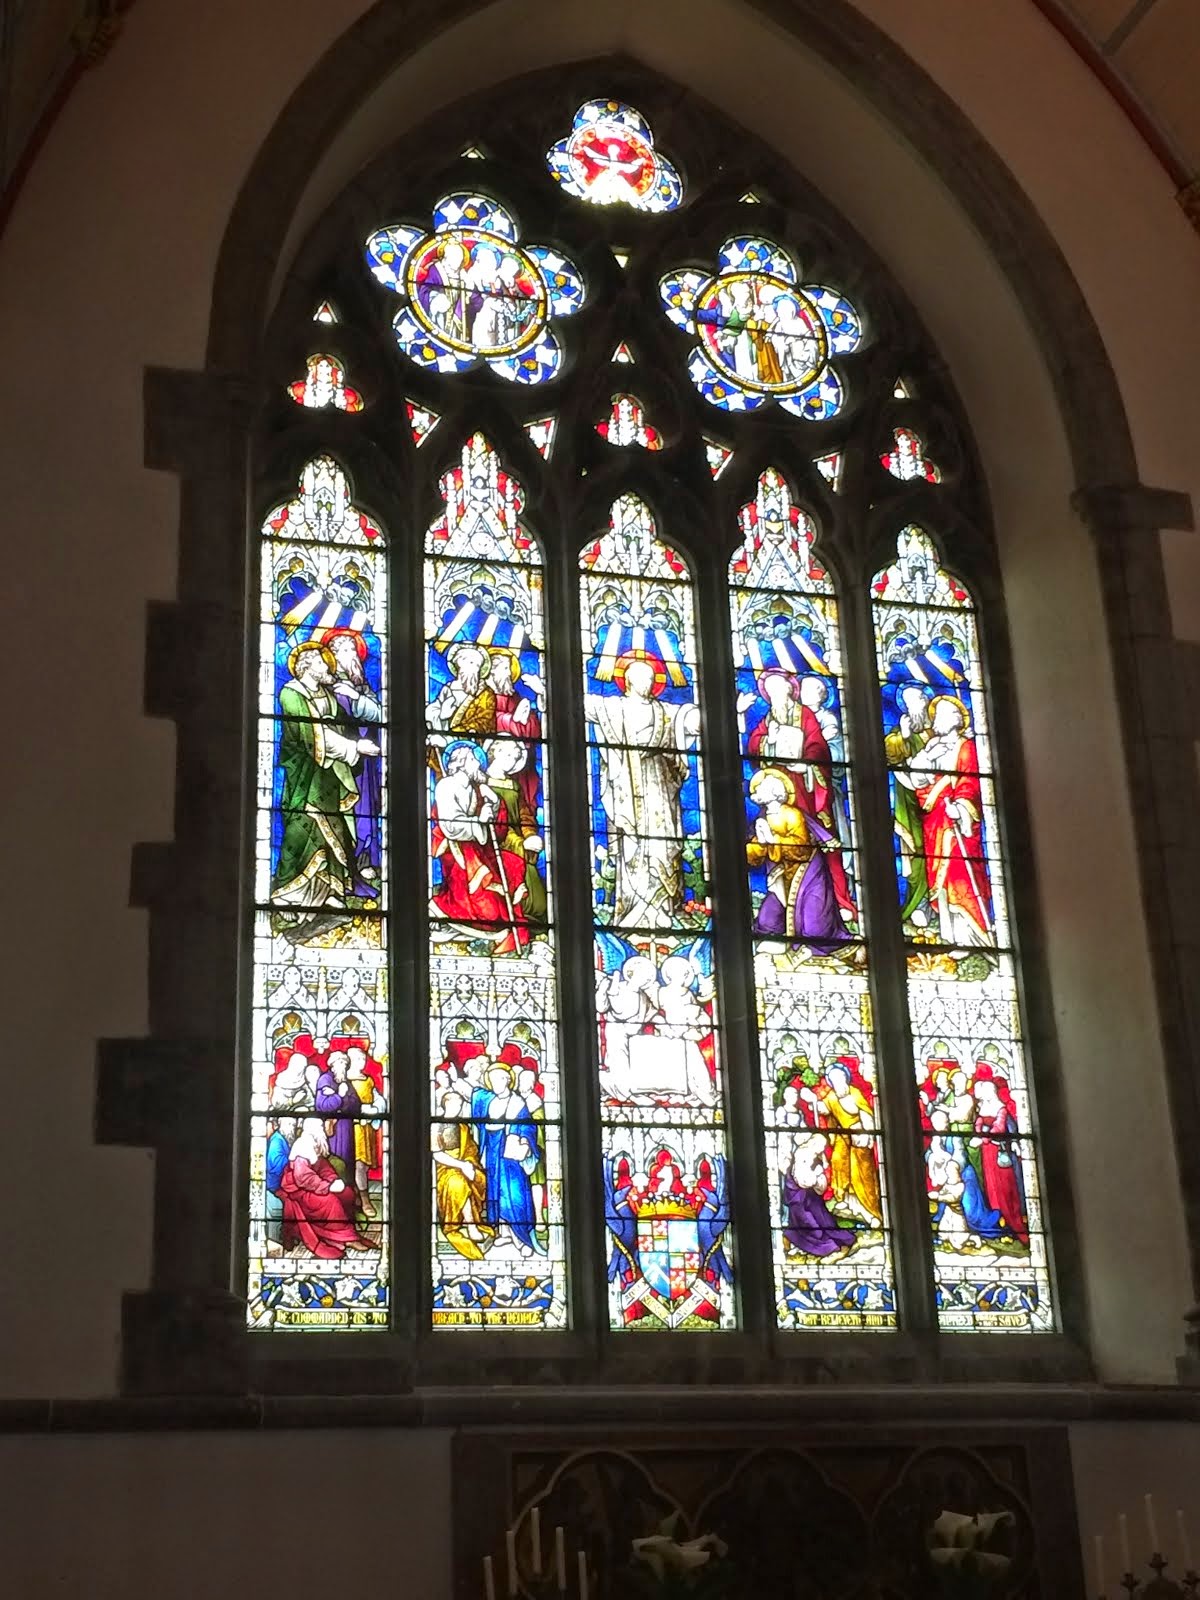 One of many stained glass windows.